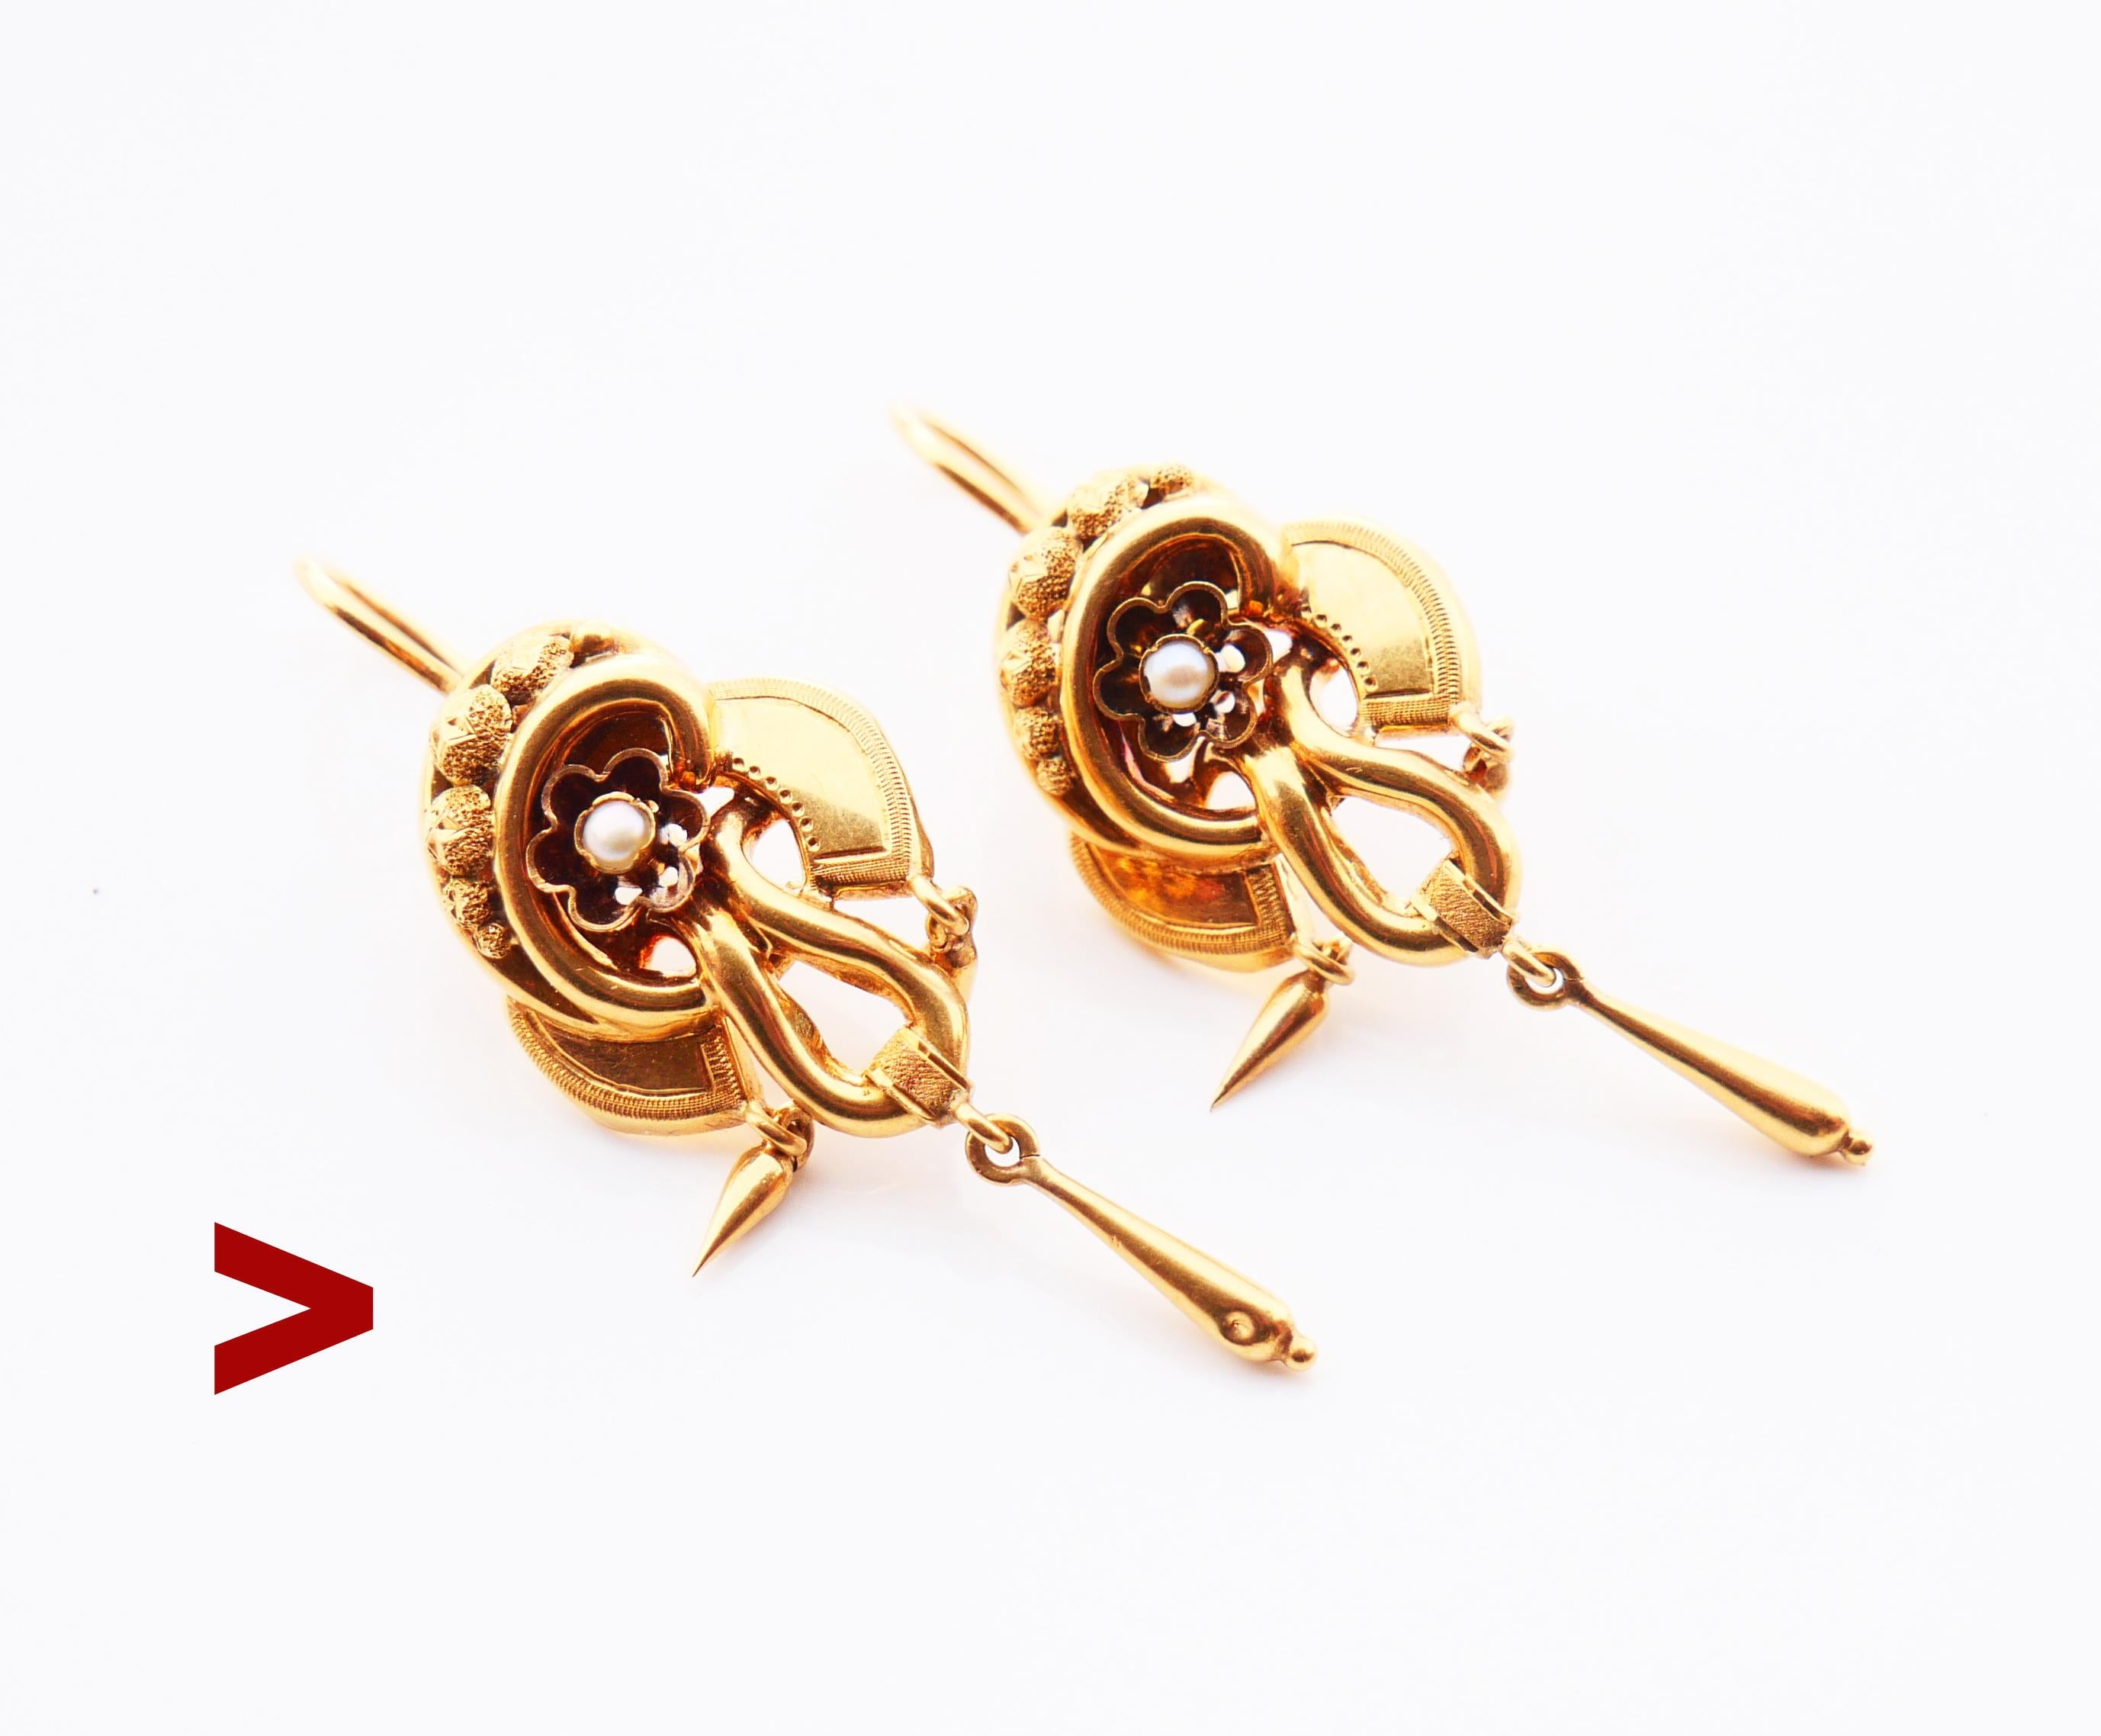 
A pair of antique earrings with delicate three-tier bodies decorated with natural seed pearls and engraved ornamentations.

Freely suspended drop-shaped dangles make this design complete.

Swedish hallmarks on both, marked 18K Gold, maker's GD&Co,